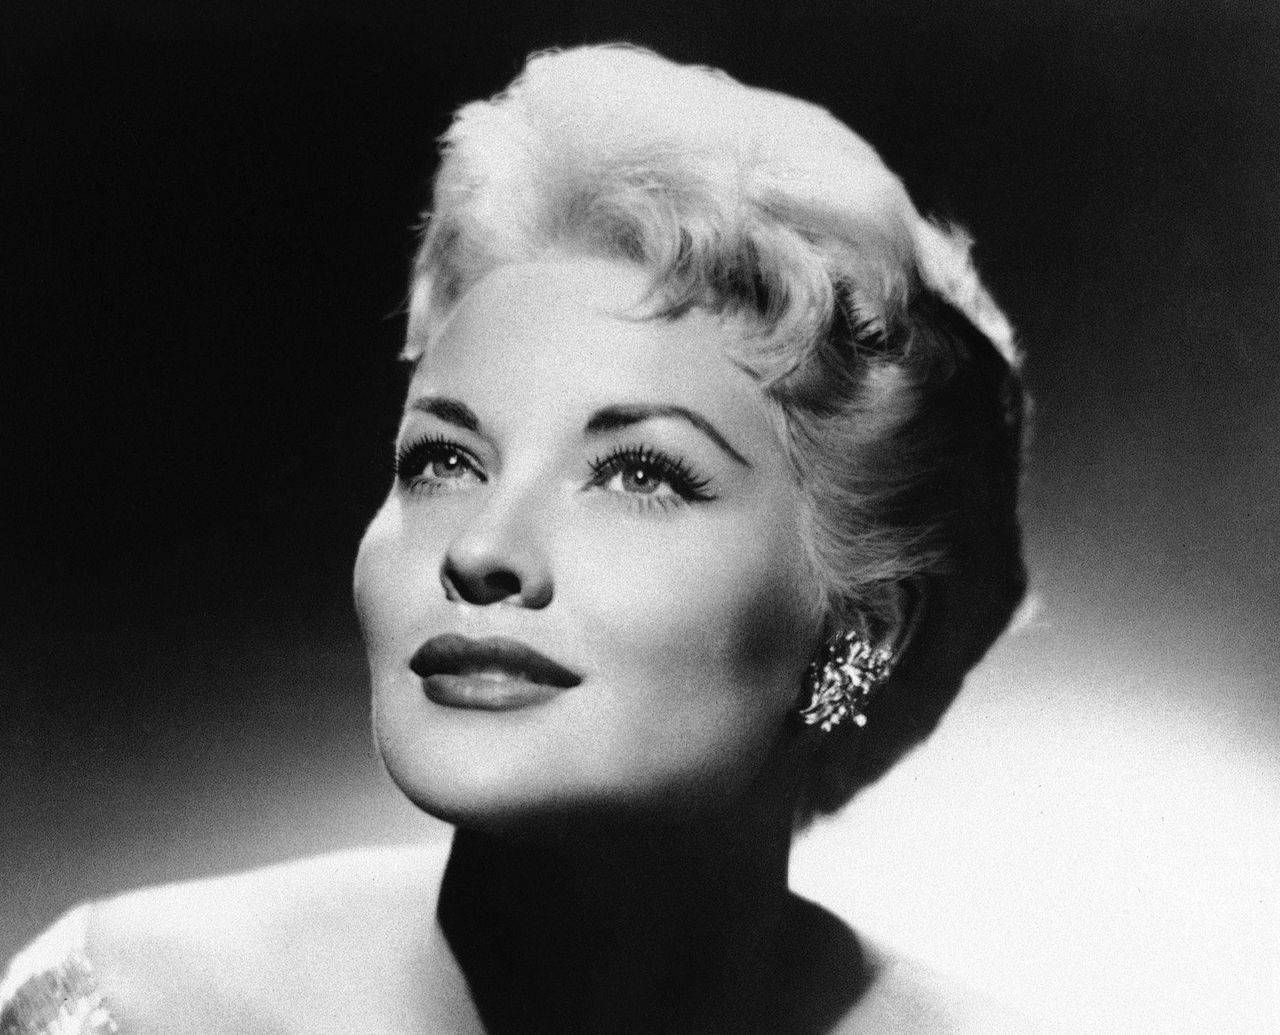 Patti Page 1950s Music Industry Icon Wallpaper